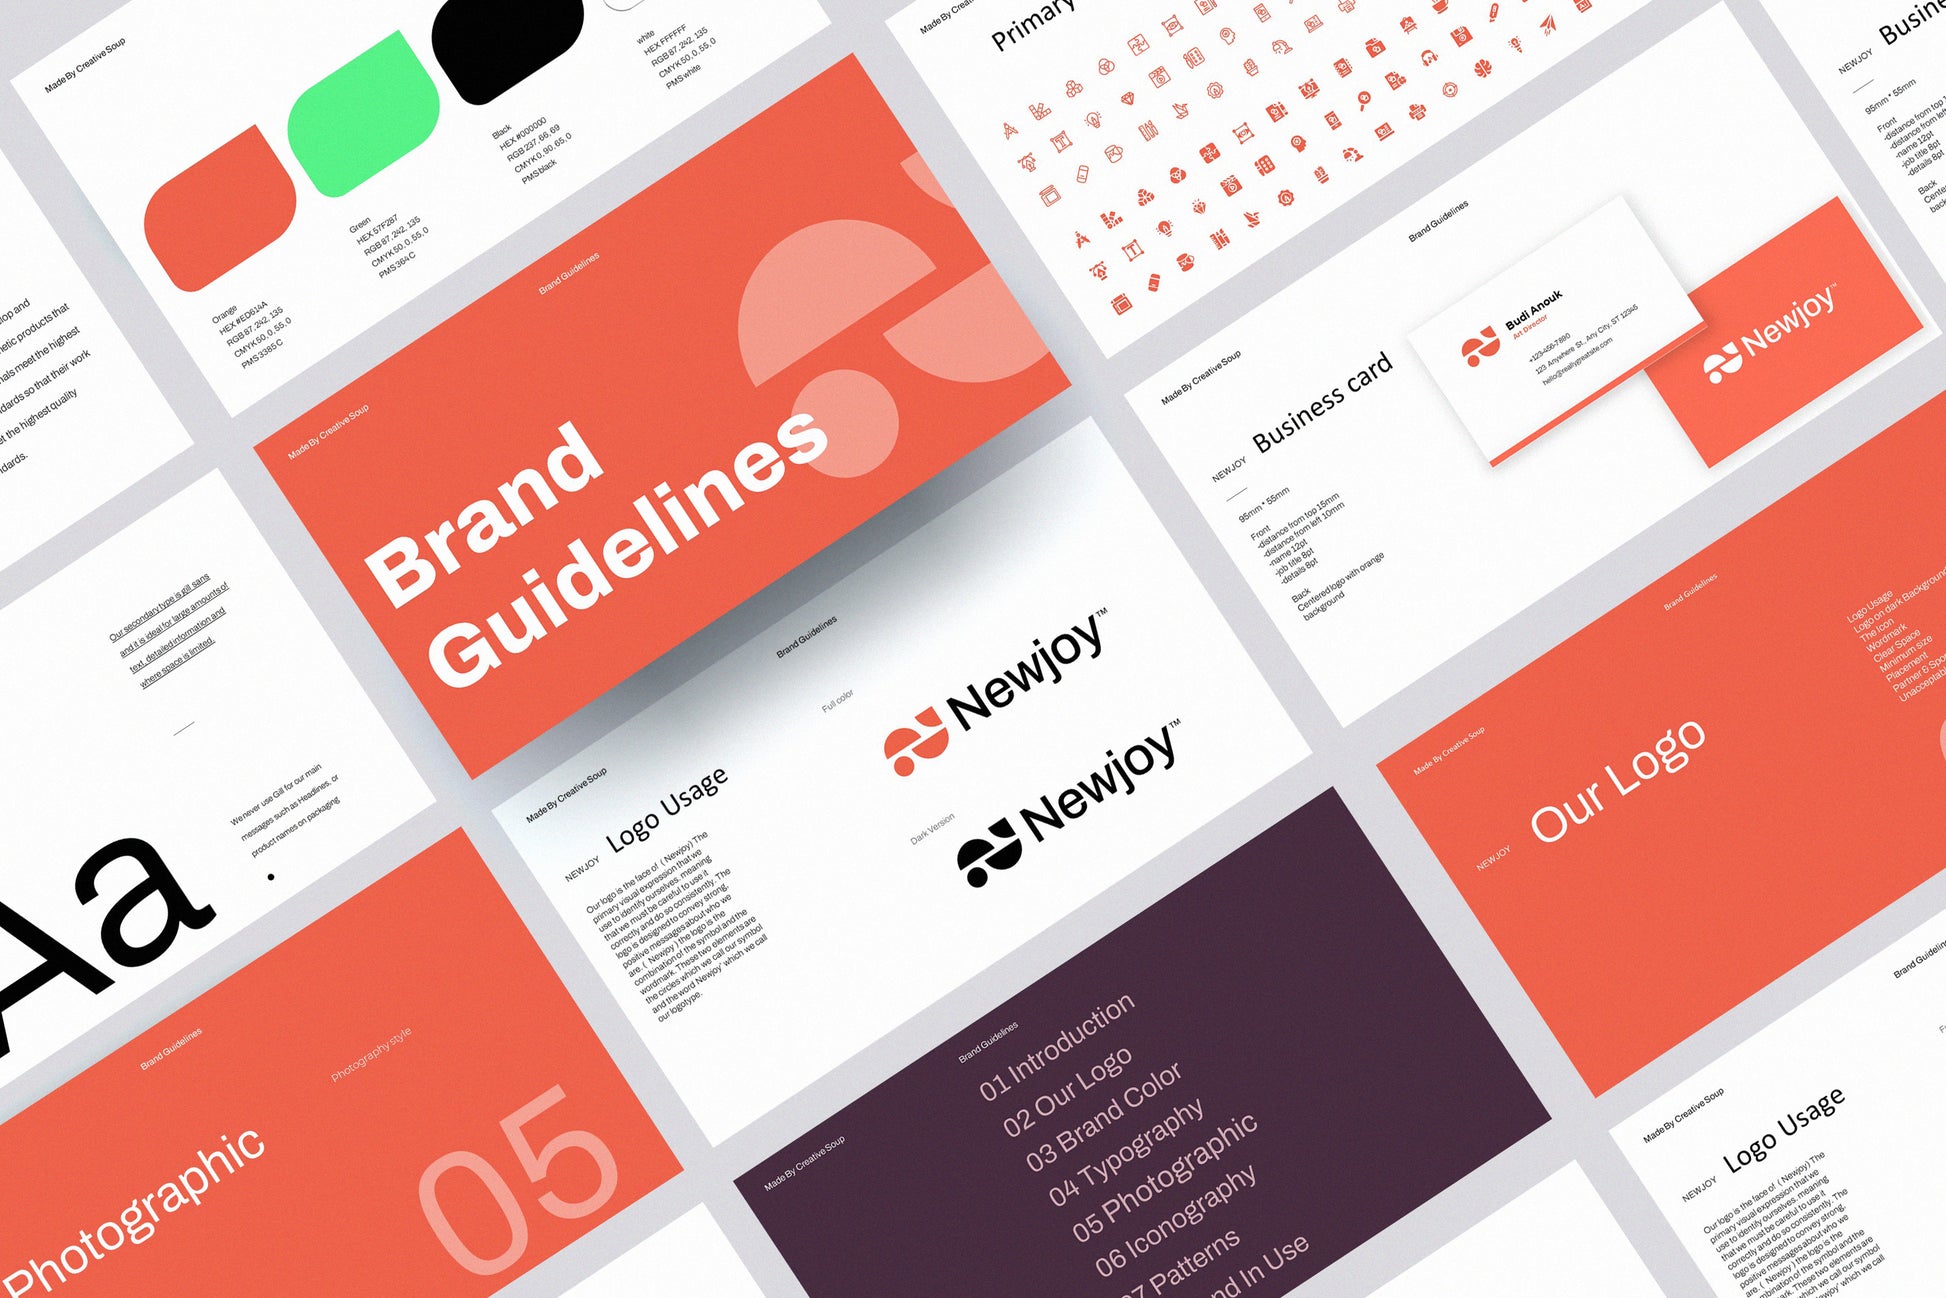 brand guidelines template